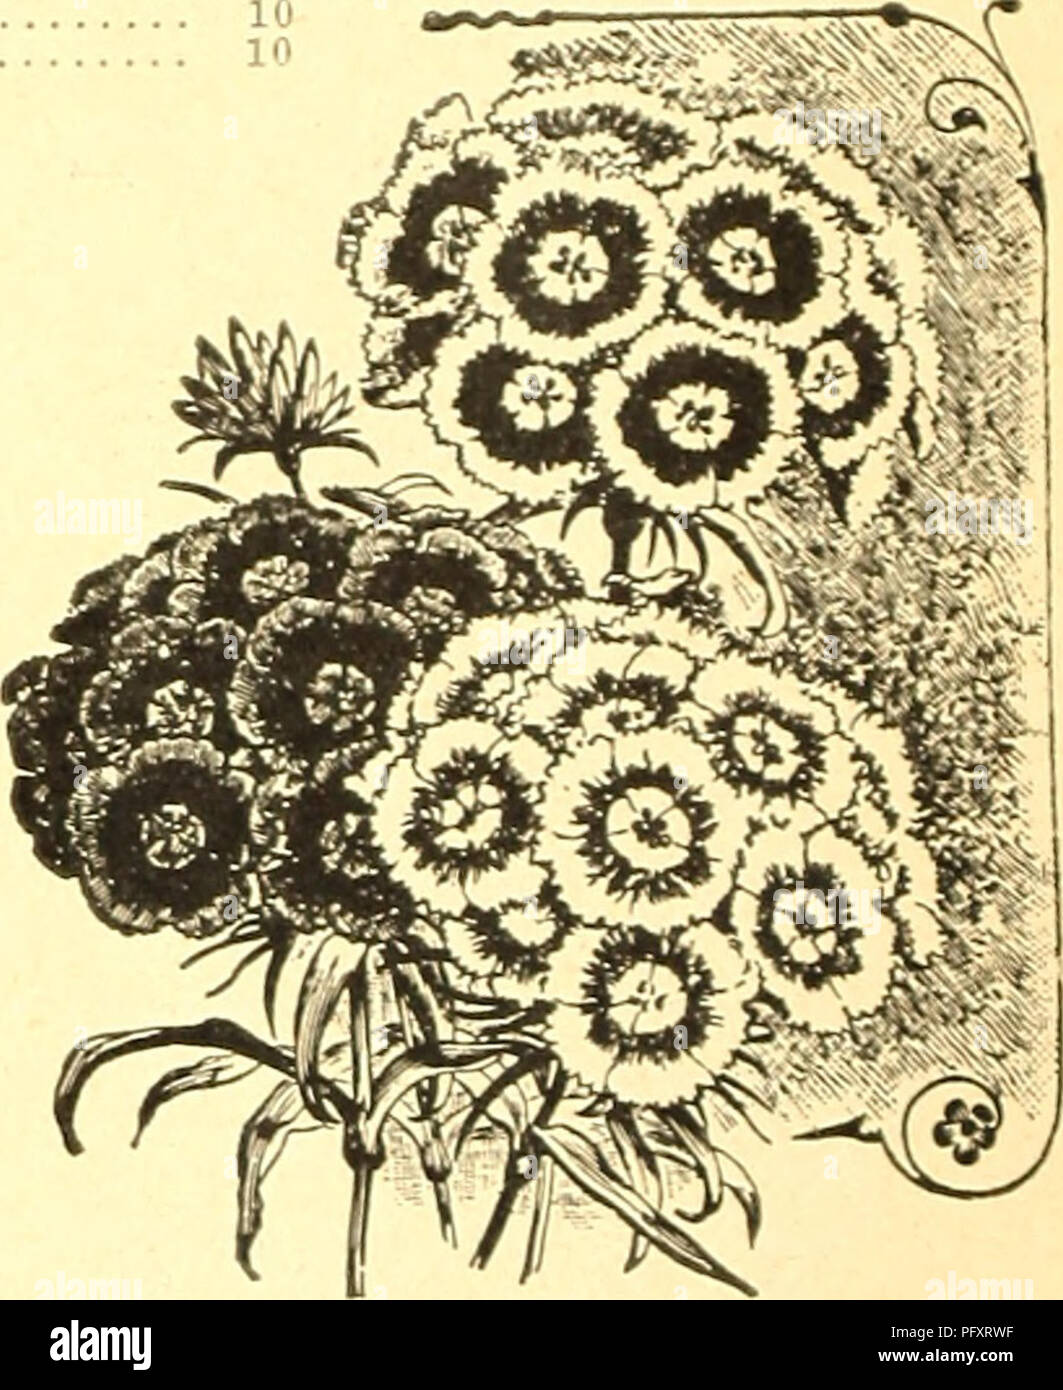 . Currie's farm and garden annual : spring 1926. Flowers Seeds Catalogs; Bulbs (Plants) Seeds Catalogs; Vegetables Seeds Catalogs; Nurseries (Horticulture) Catalogs; Plants, Ornamental Catalogs; Gardening Equipment and supplies Catalogs. Scabiosa or Mourning Bride. SCABIOSA. Slourning Bride or Sweet Seabiosus. Very desirable plants, producing very pretty flowers of many colors In great profusion. Good for cutting for vases, etc. H. A. Pkt. DÂ«arf DoubleâFlowers very double and globular. ^ oz. 25c 10 Leviutluio MixedâLarge and beautiful double flowers: tall growing. % oz. 25c. 10 PERE.N.MAL SCA Stock Photo